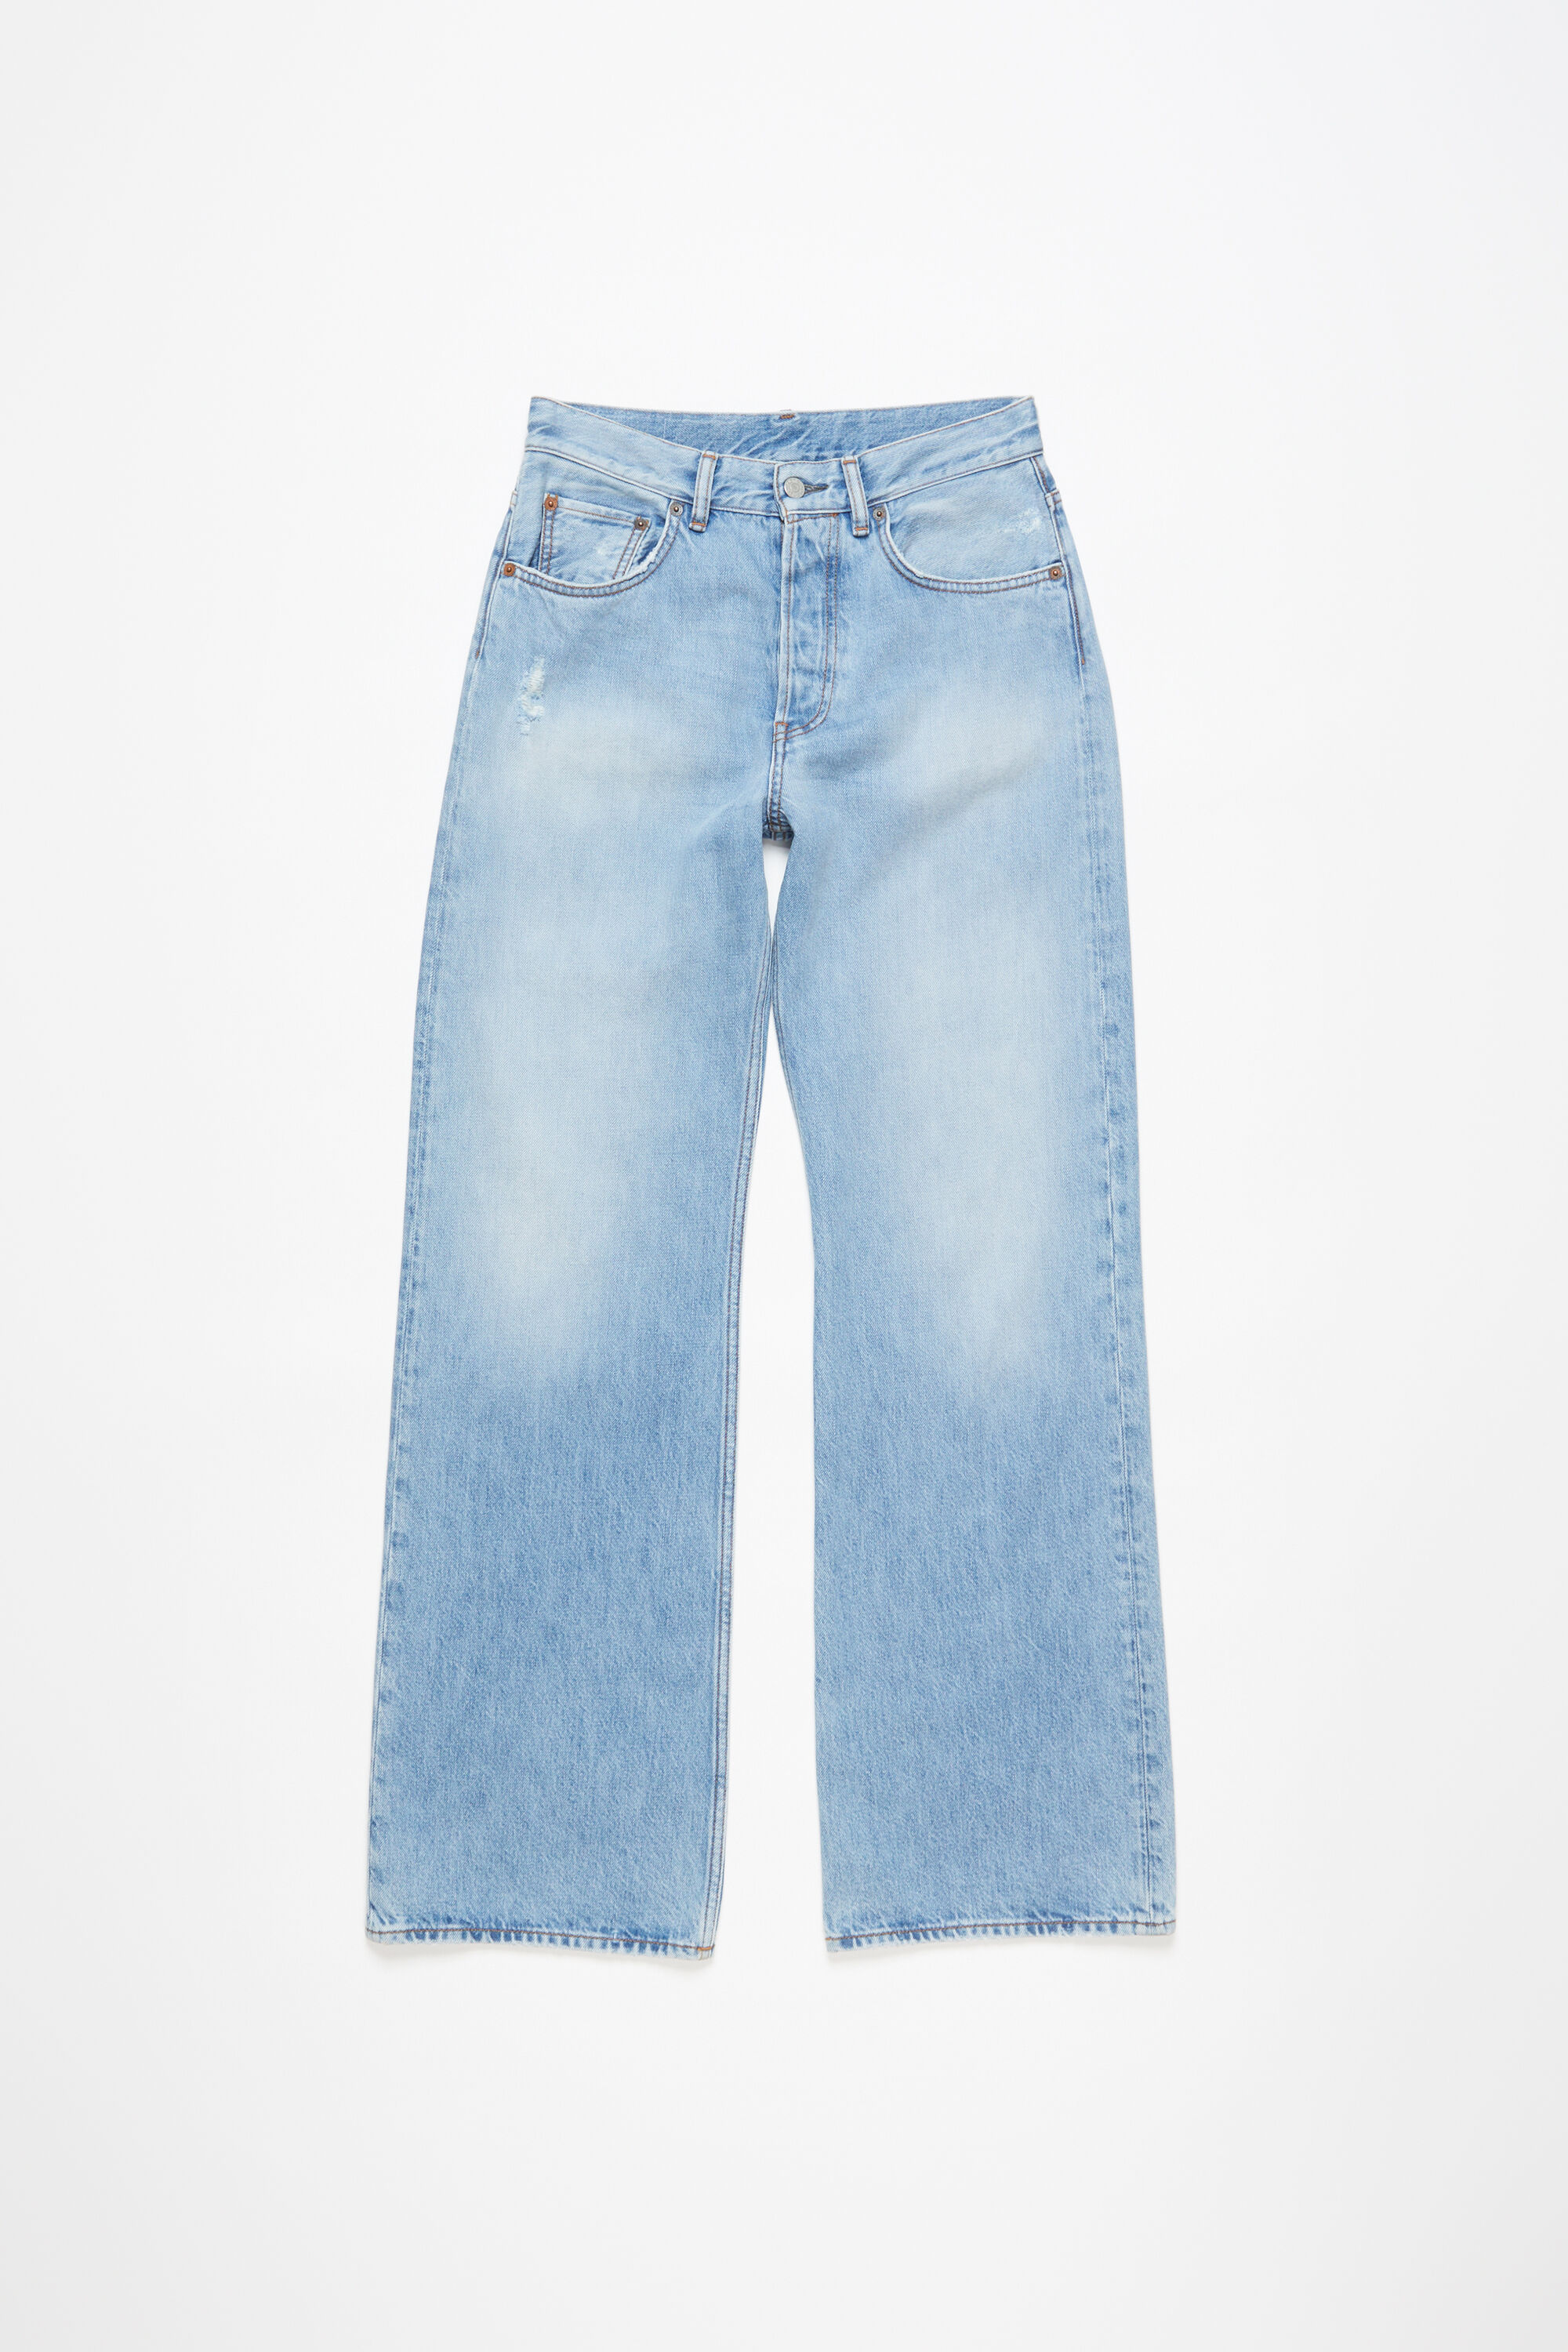 Acne Studios - Loose fit jeans - 2021F - Mid blue